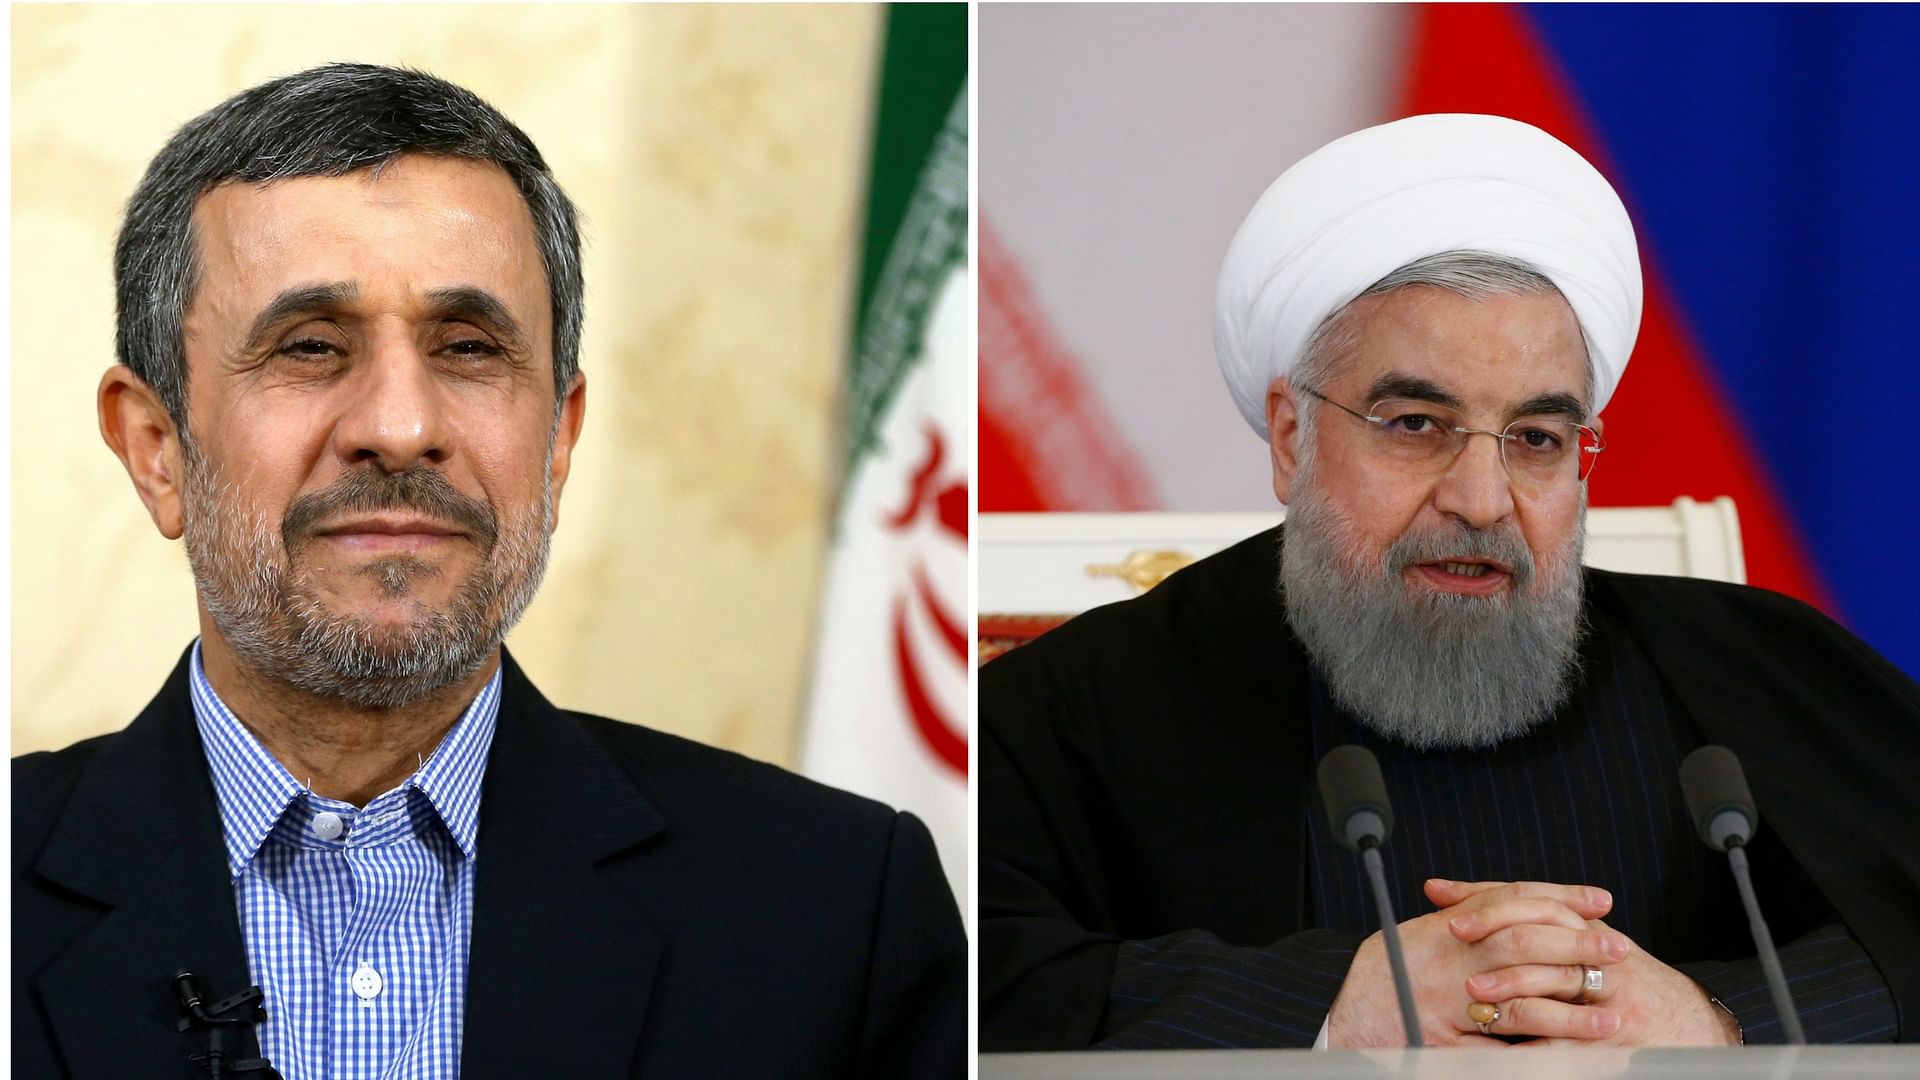 While  former president Mahmoud Ahmadinejad (left) was disqualified, Iranian President Hassan Rouhani (right) was approved to run in May’s presidential election. (Photo: AP, Reuters)